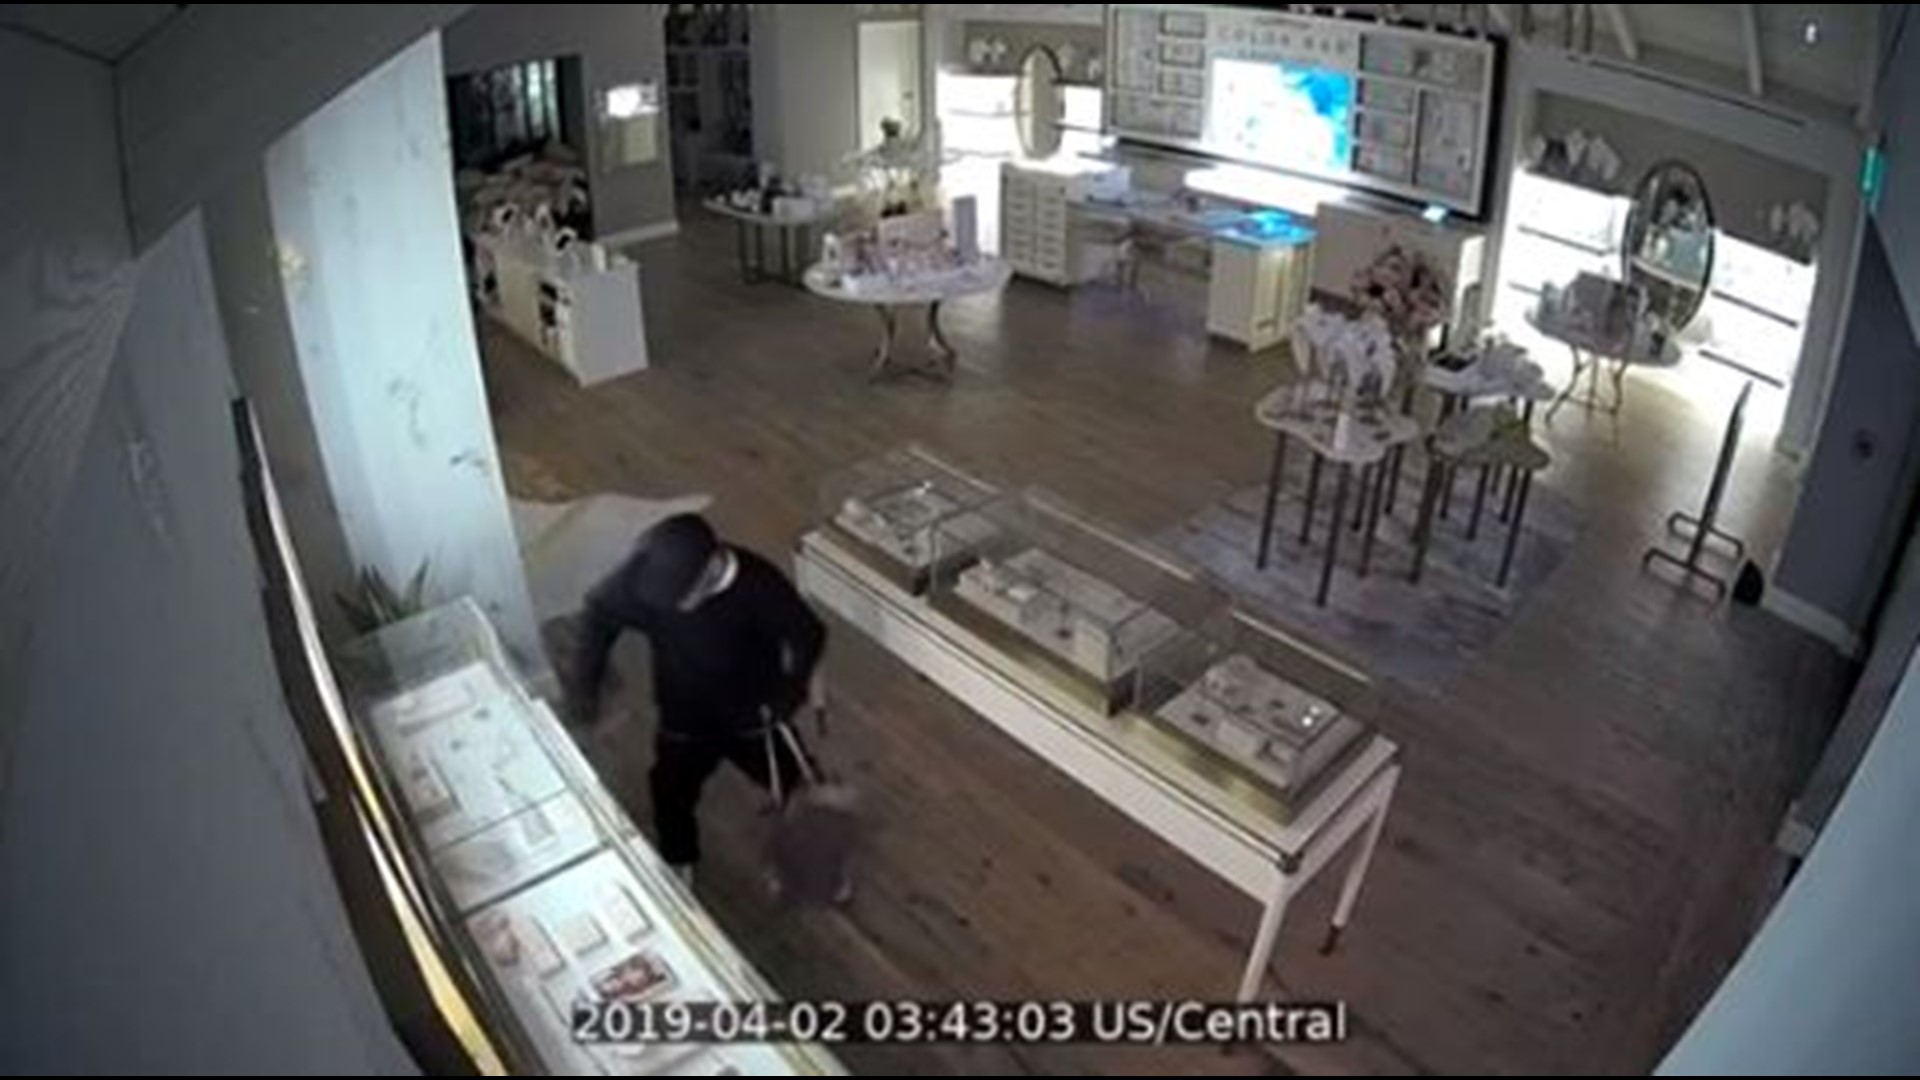 Surveillance video shows an intruder breaking into a Kendra Scott flagship store on South Congress Ave. and removing thousands of dollars of merchandise around 3:40 am on April 2.